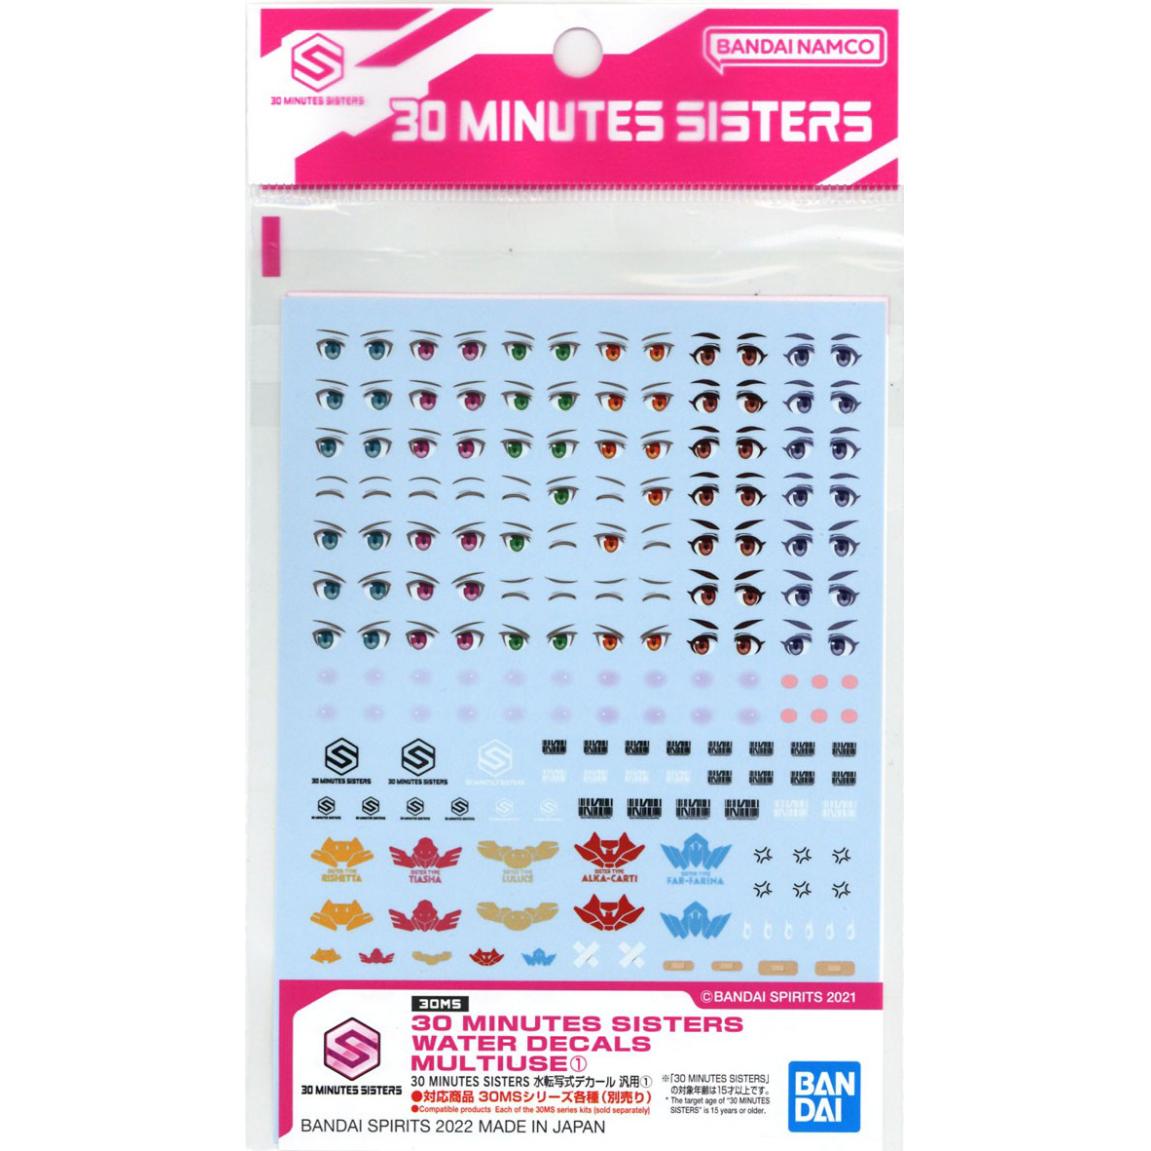 BANDAI 30MS 1/144 30 Minutes Sisters Water Decals Multiuse 1